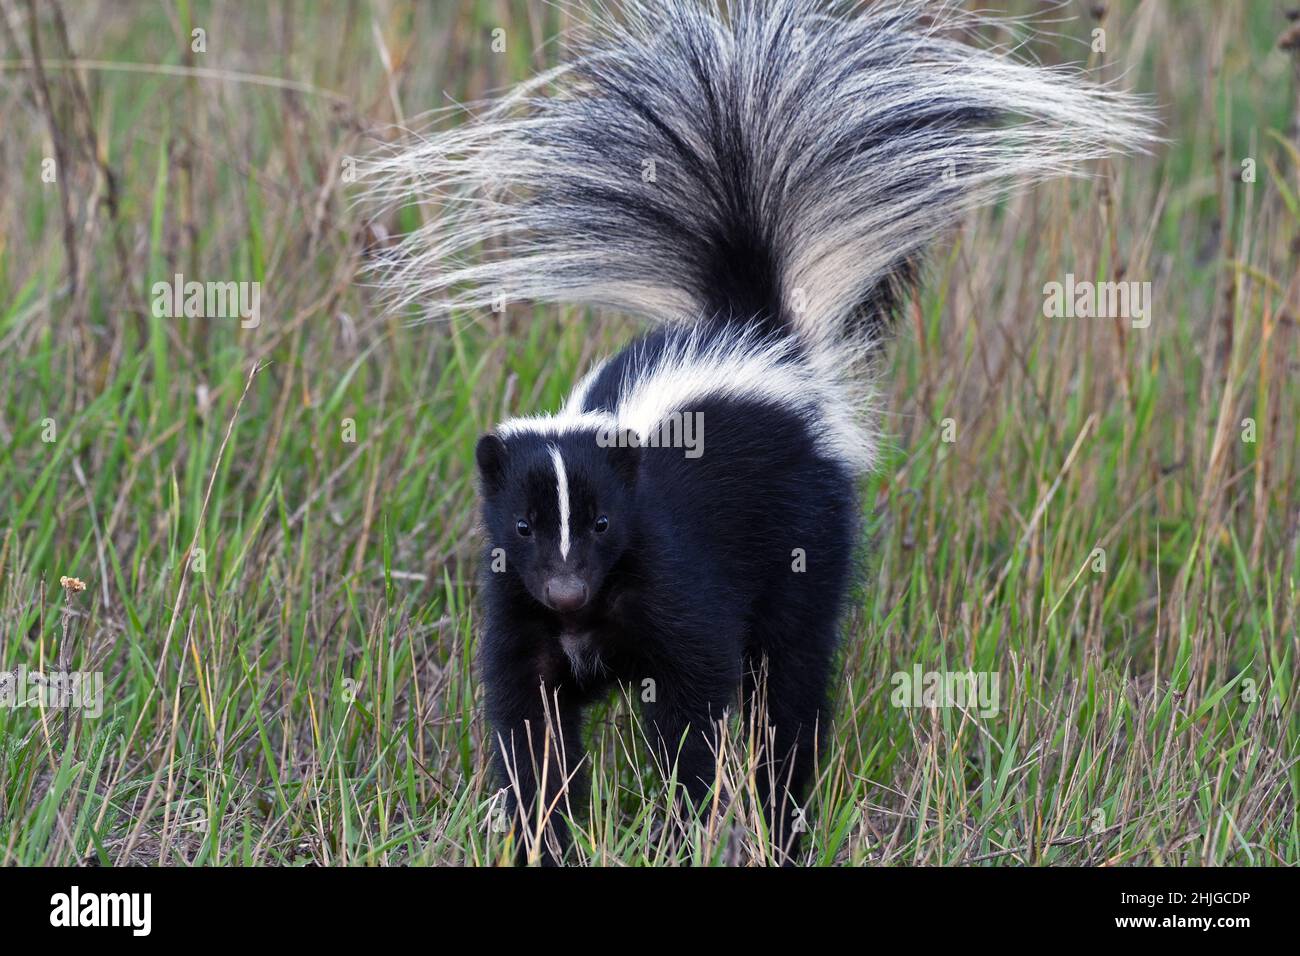 Striped skunk raising its tail as a warning in a grassland in summer. Yaak Valley, northwest Montana. (Photo by Randy Beacham) Stock Photo